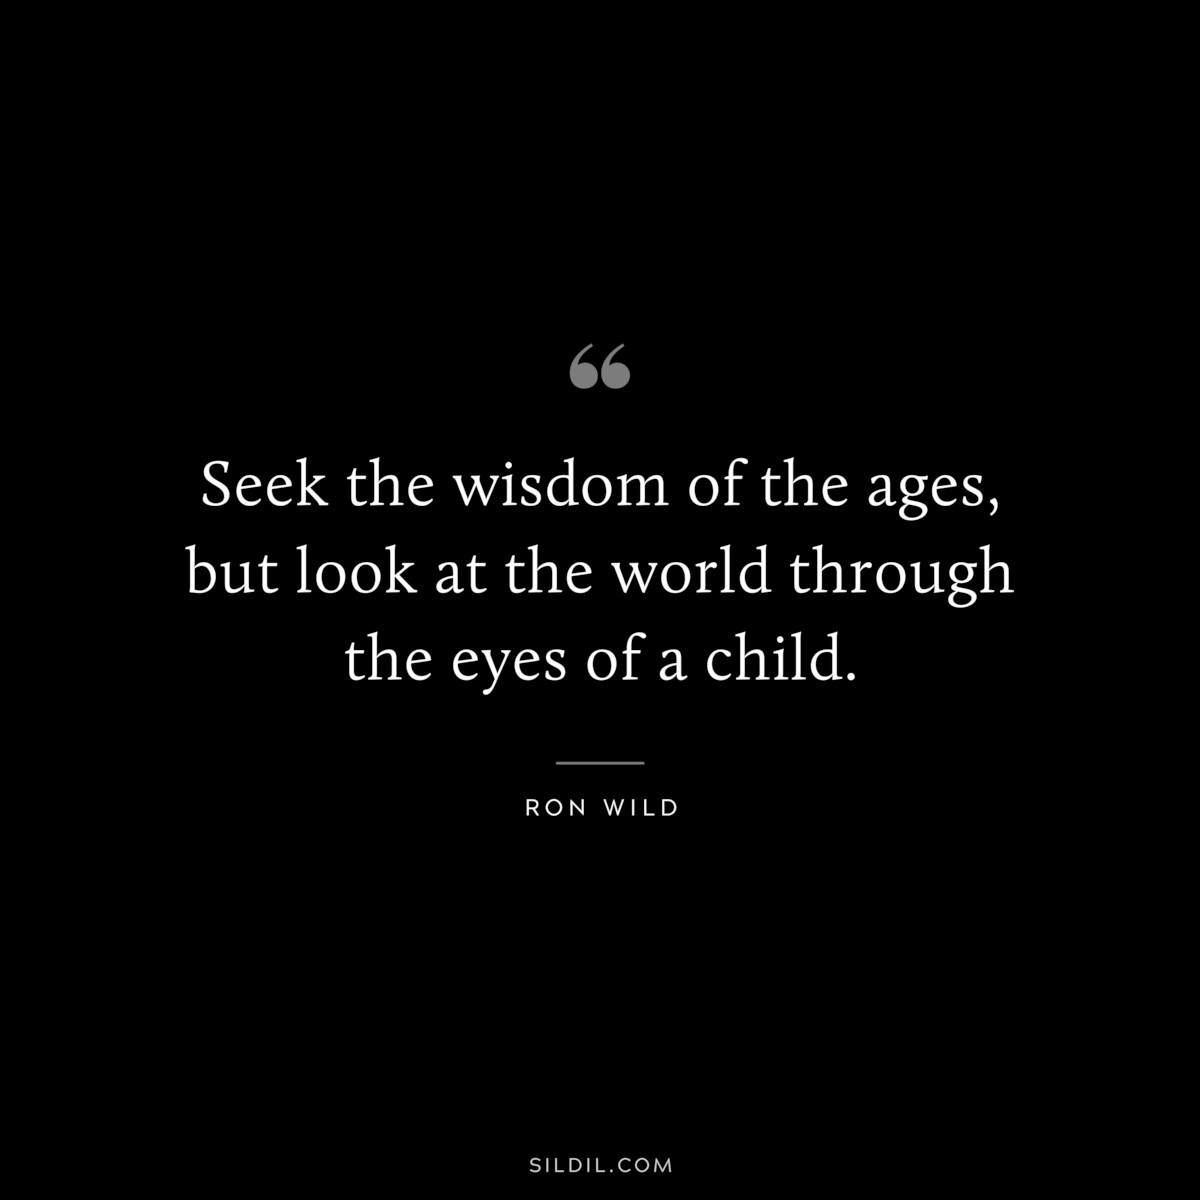 Seek the wisdom of the ages, but look at the world through the eyes of a child. ― Ron Wild